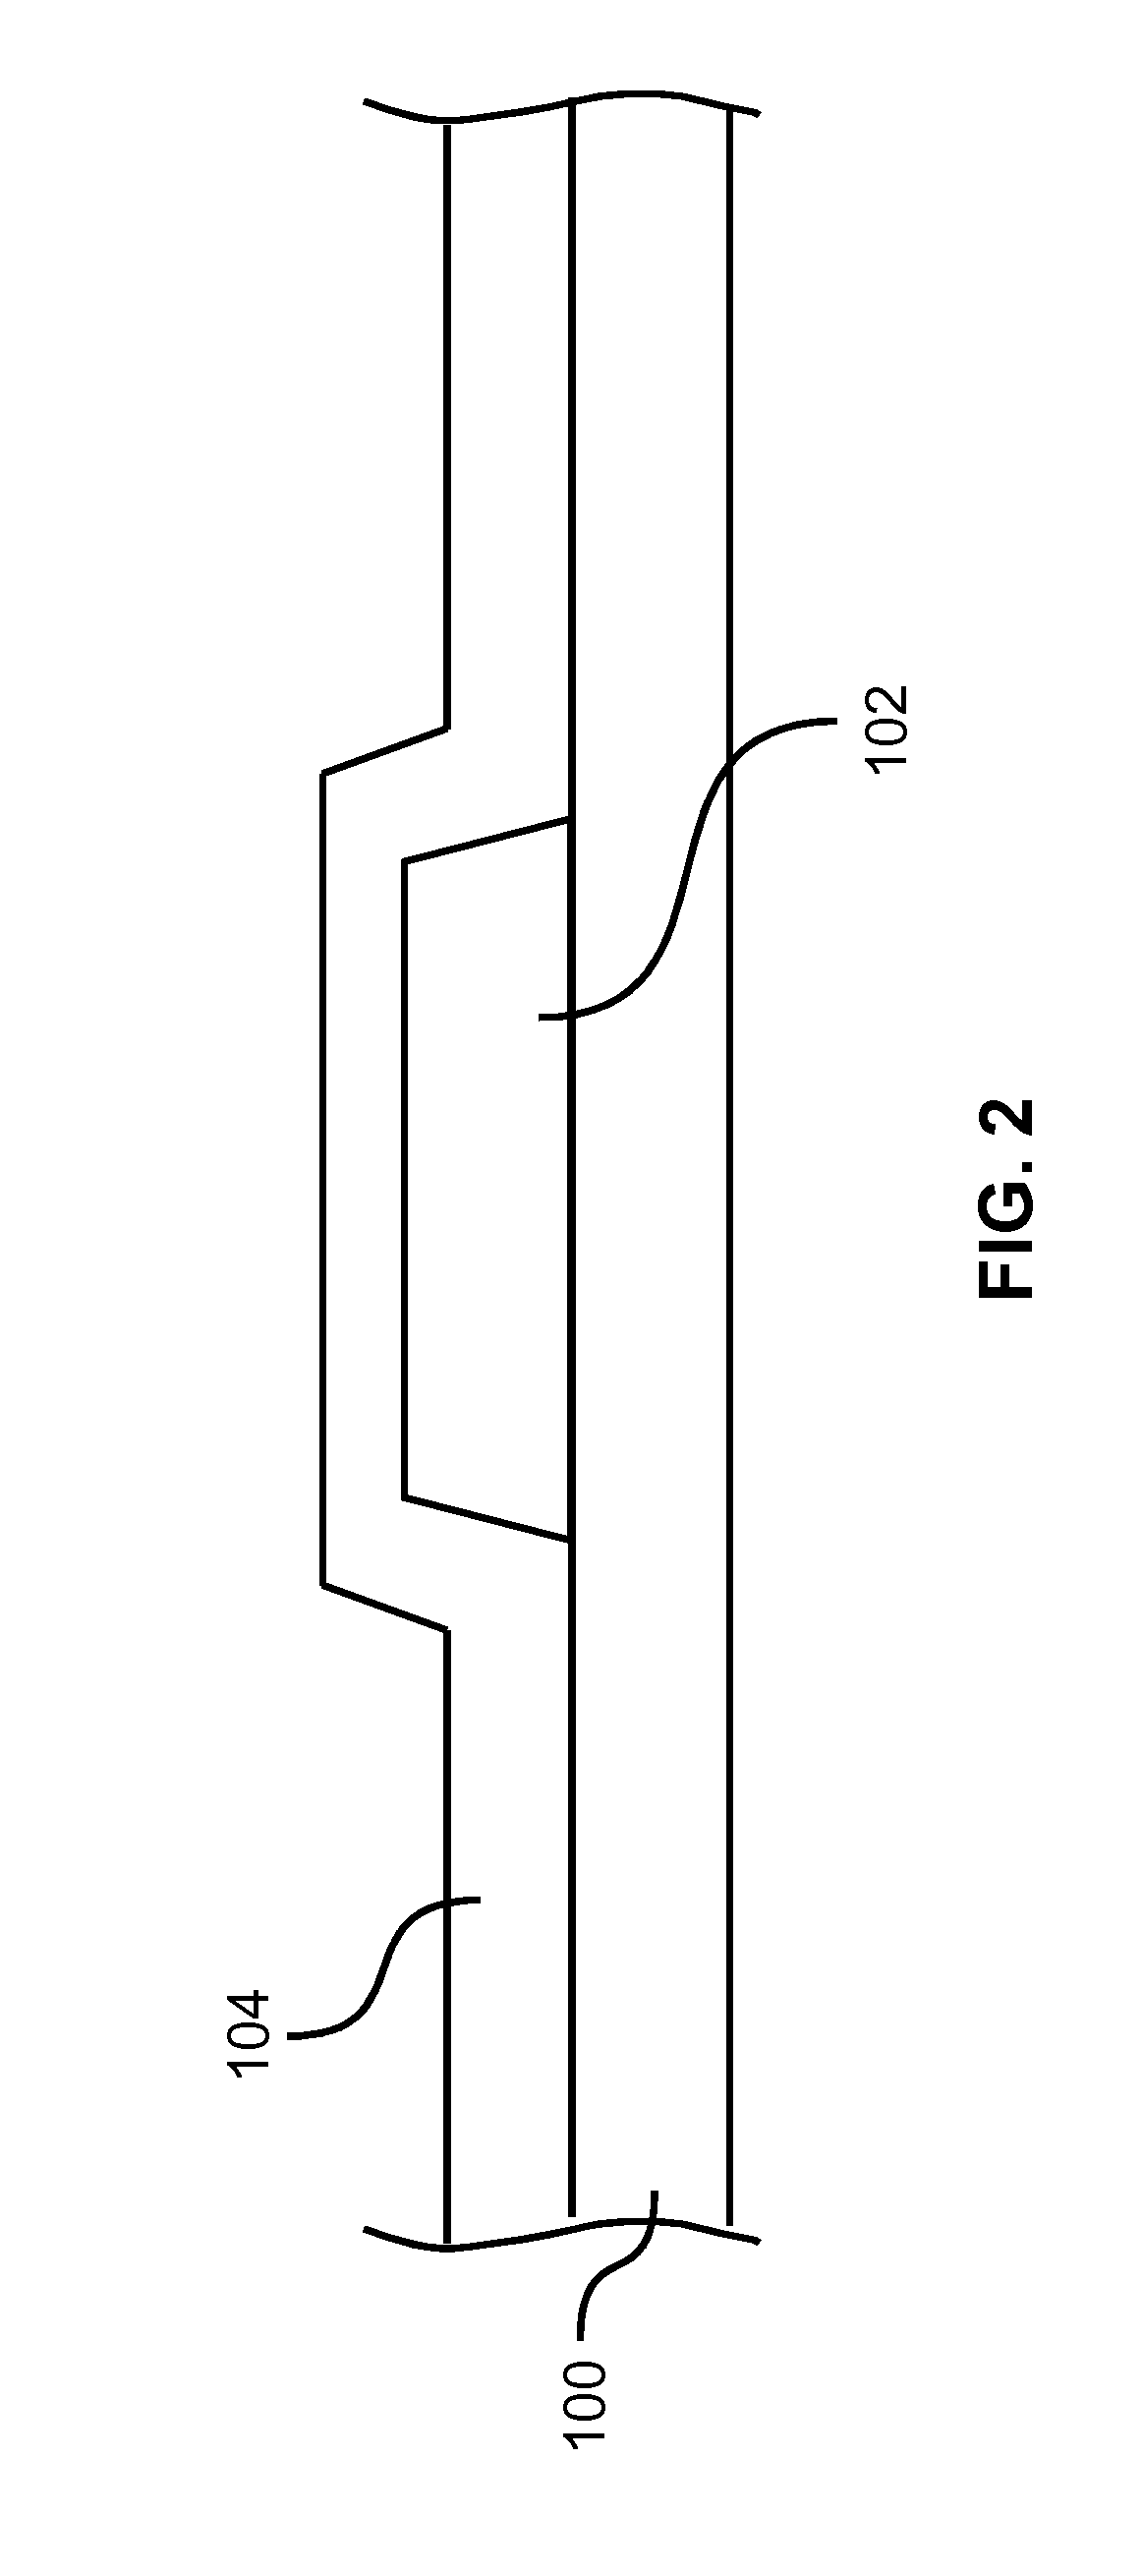 Methods for Forming Back-Channel-Etch Devices with Copper-Based Electrodes